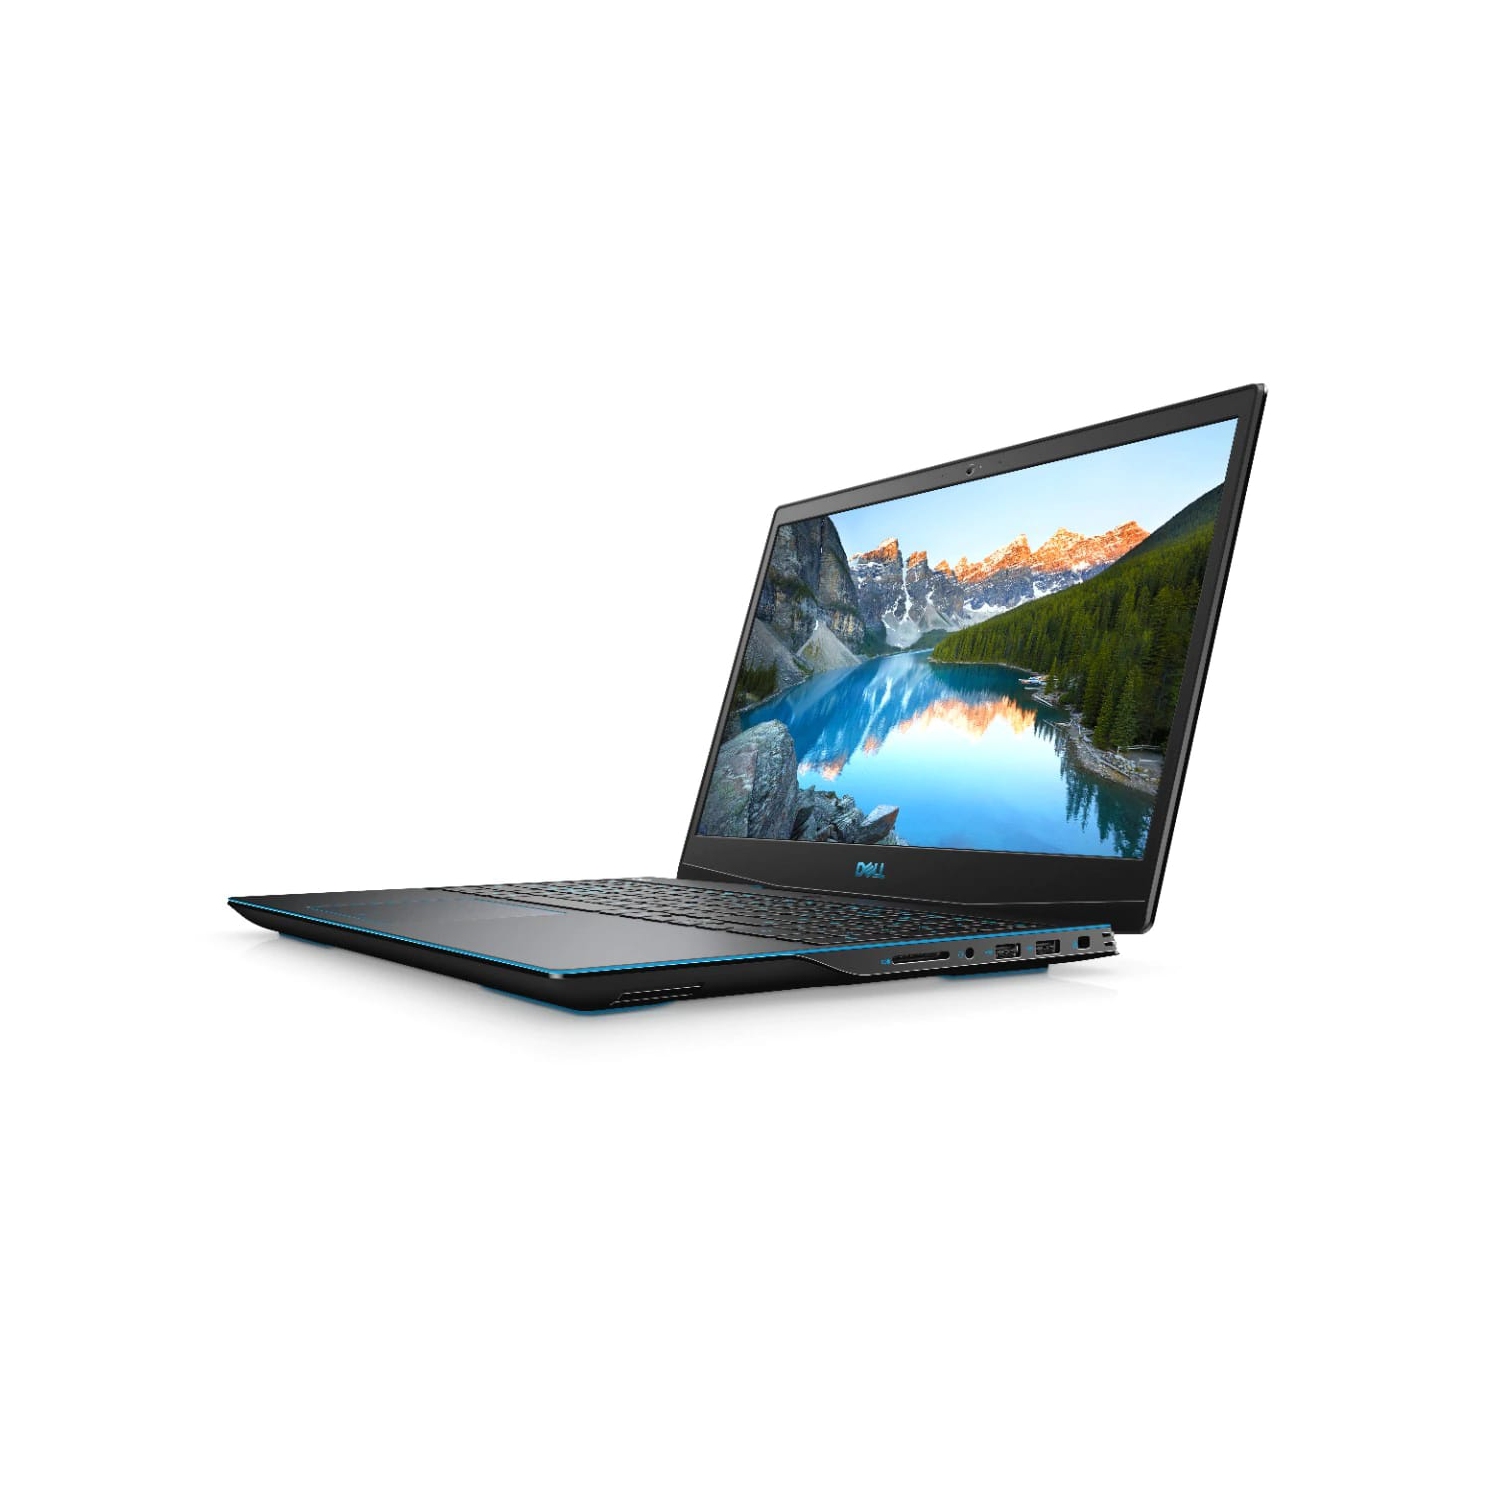 Refurbished (Excellent) – Dell G3 3500 Gaming Laptop (2020) | 15.6" FHD | Core i7 - 512GB SSD - 16GB RAM - 1660 Ti | 6 Cores @ 5 GHz - 10th Gen CPU - 6GB GDDR6